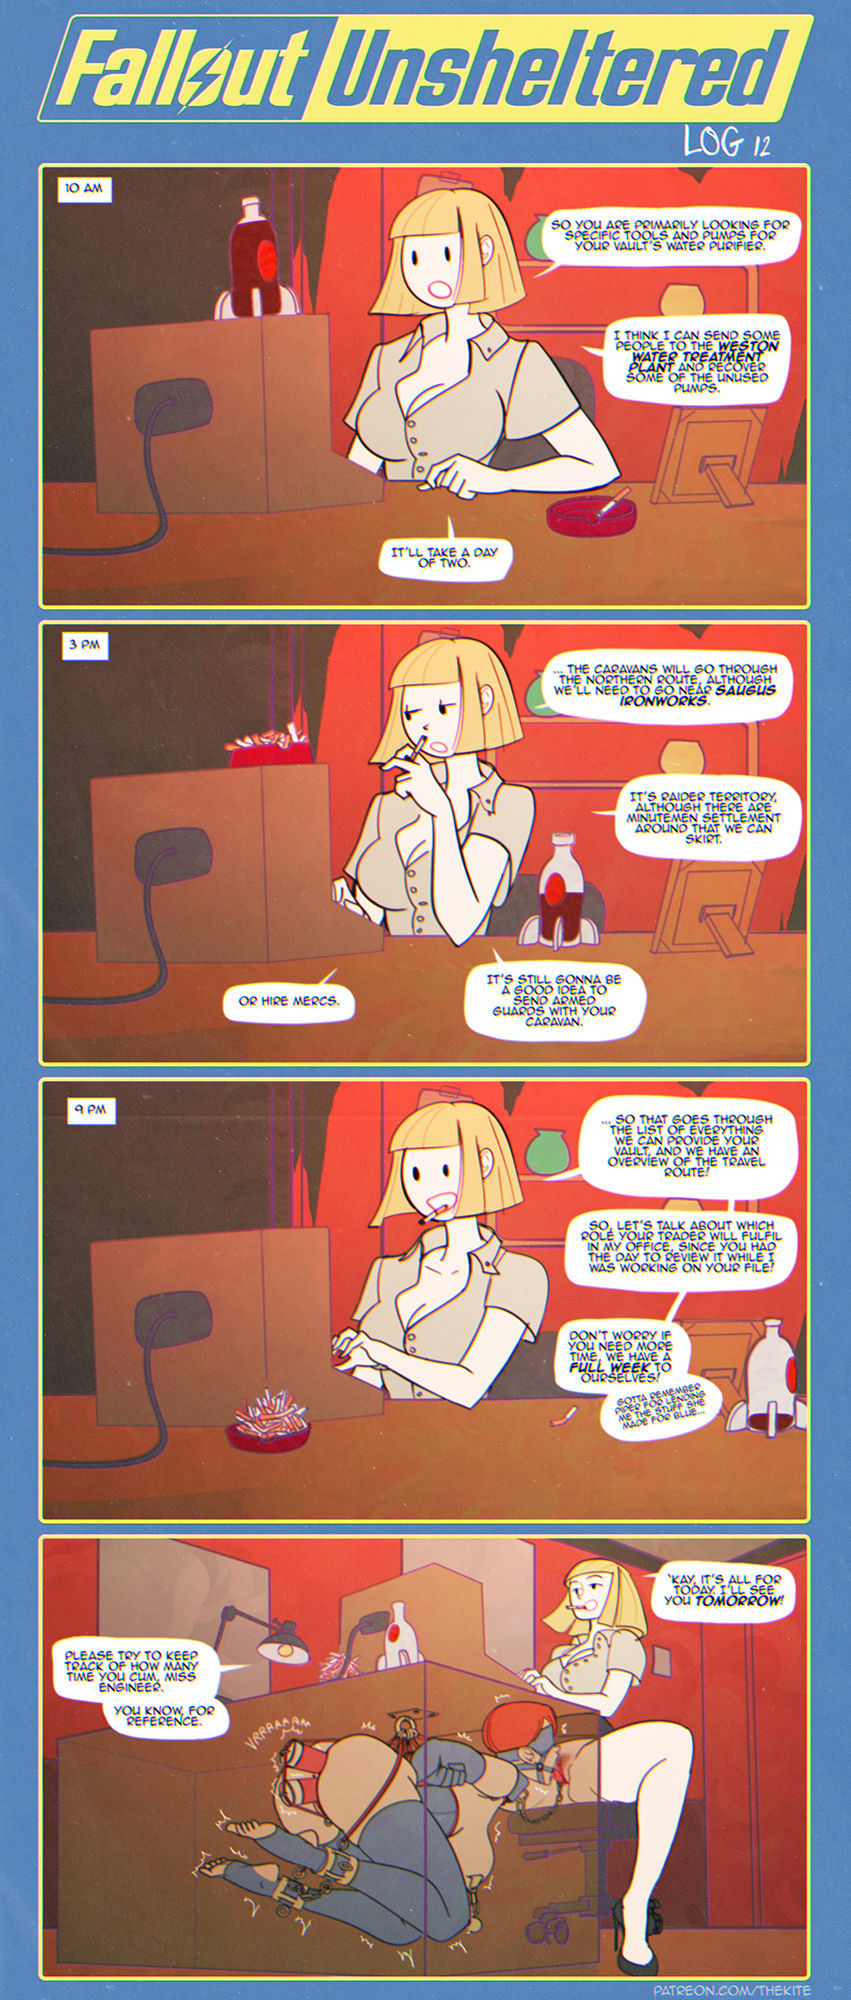 Fallout Unsheltered - The Kite page 15